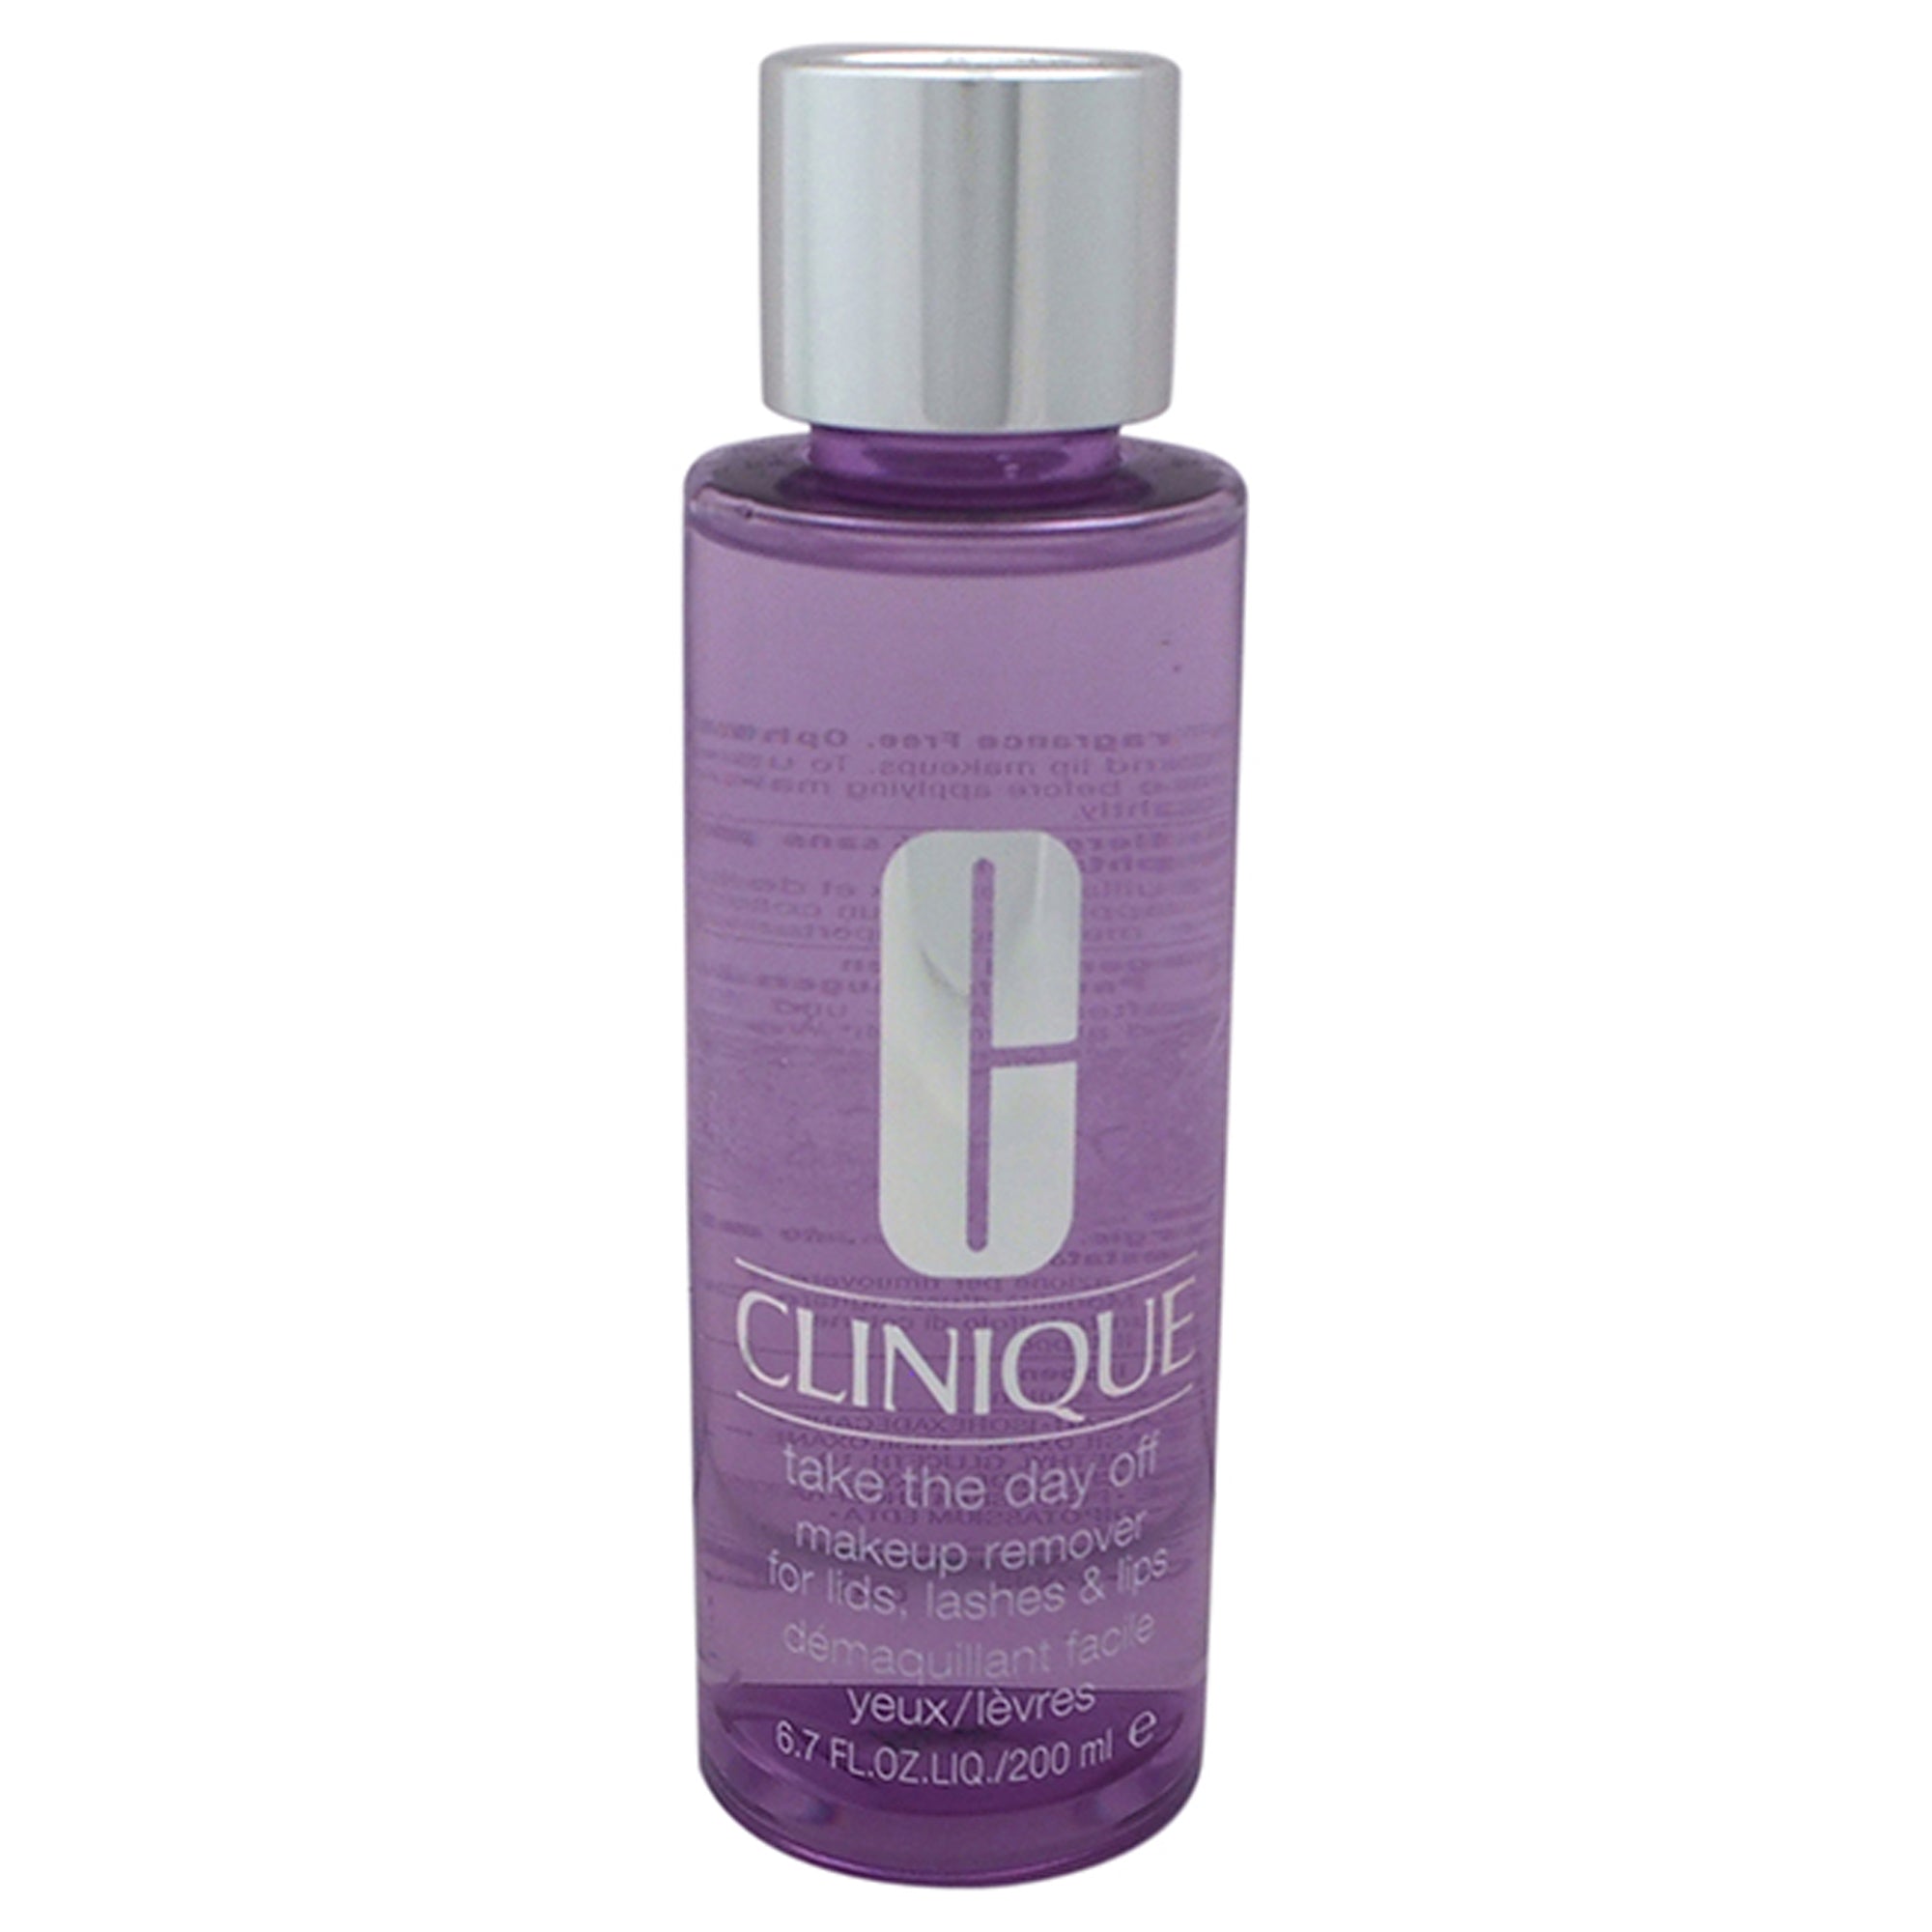 Take The Day Off Makeup Remover by Clinique for Women - 6.7 oz Makeup Remover